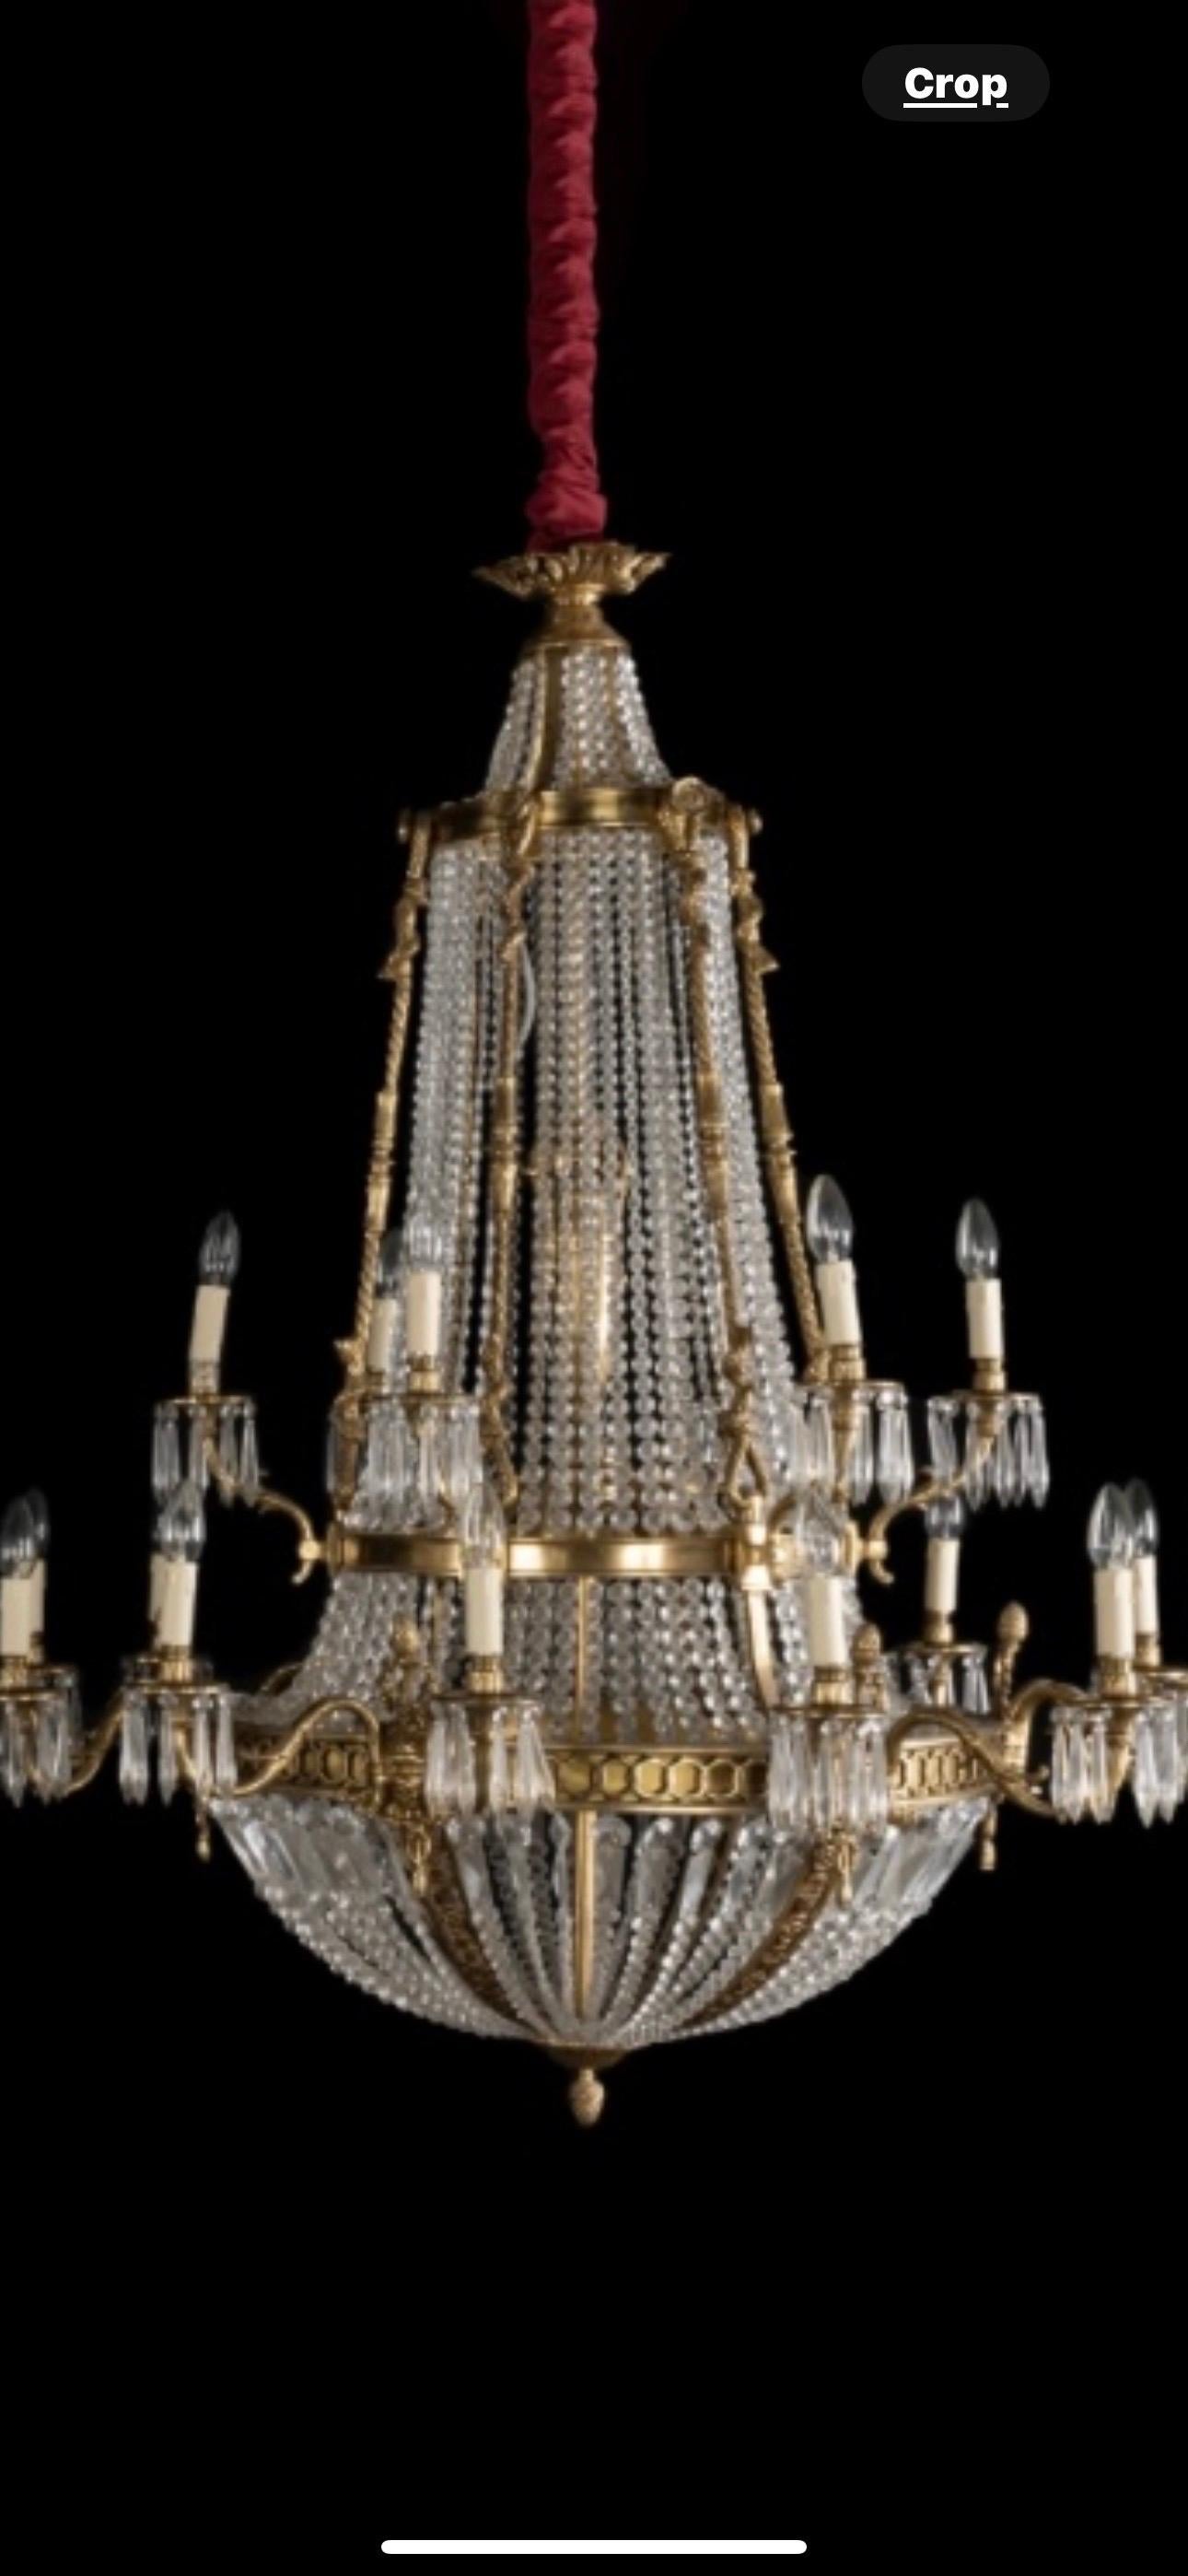 Rare opportunity, 20thC French empire chandeliers from TV show THE CROWN In Good Condition For Sale In Worthing, GB